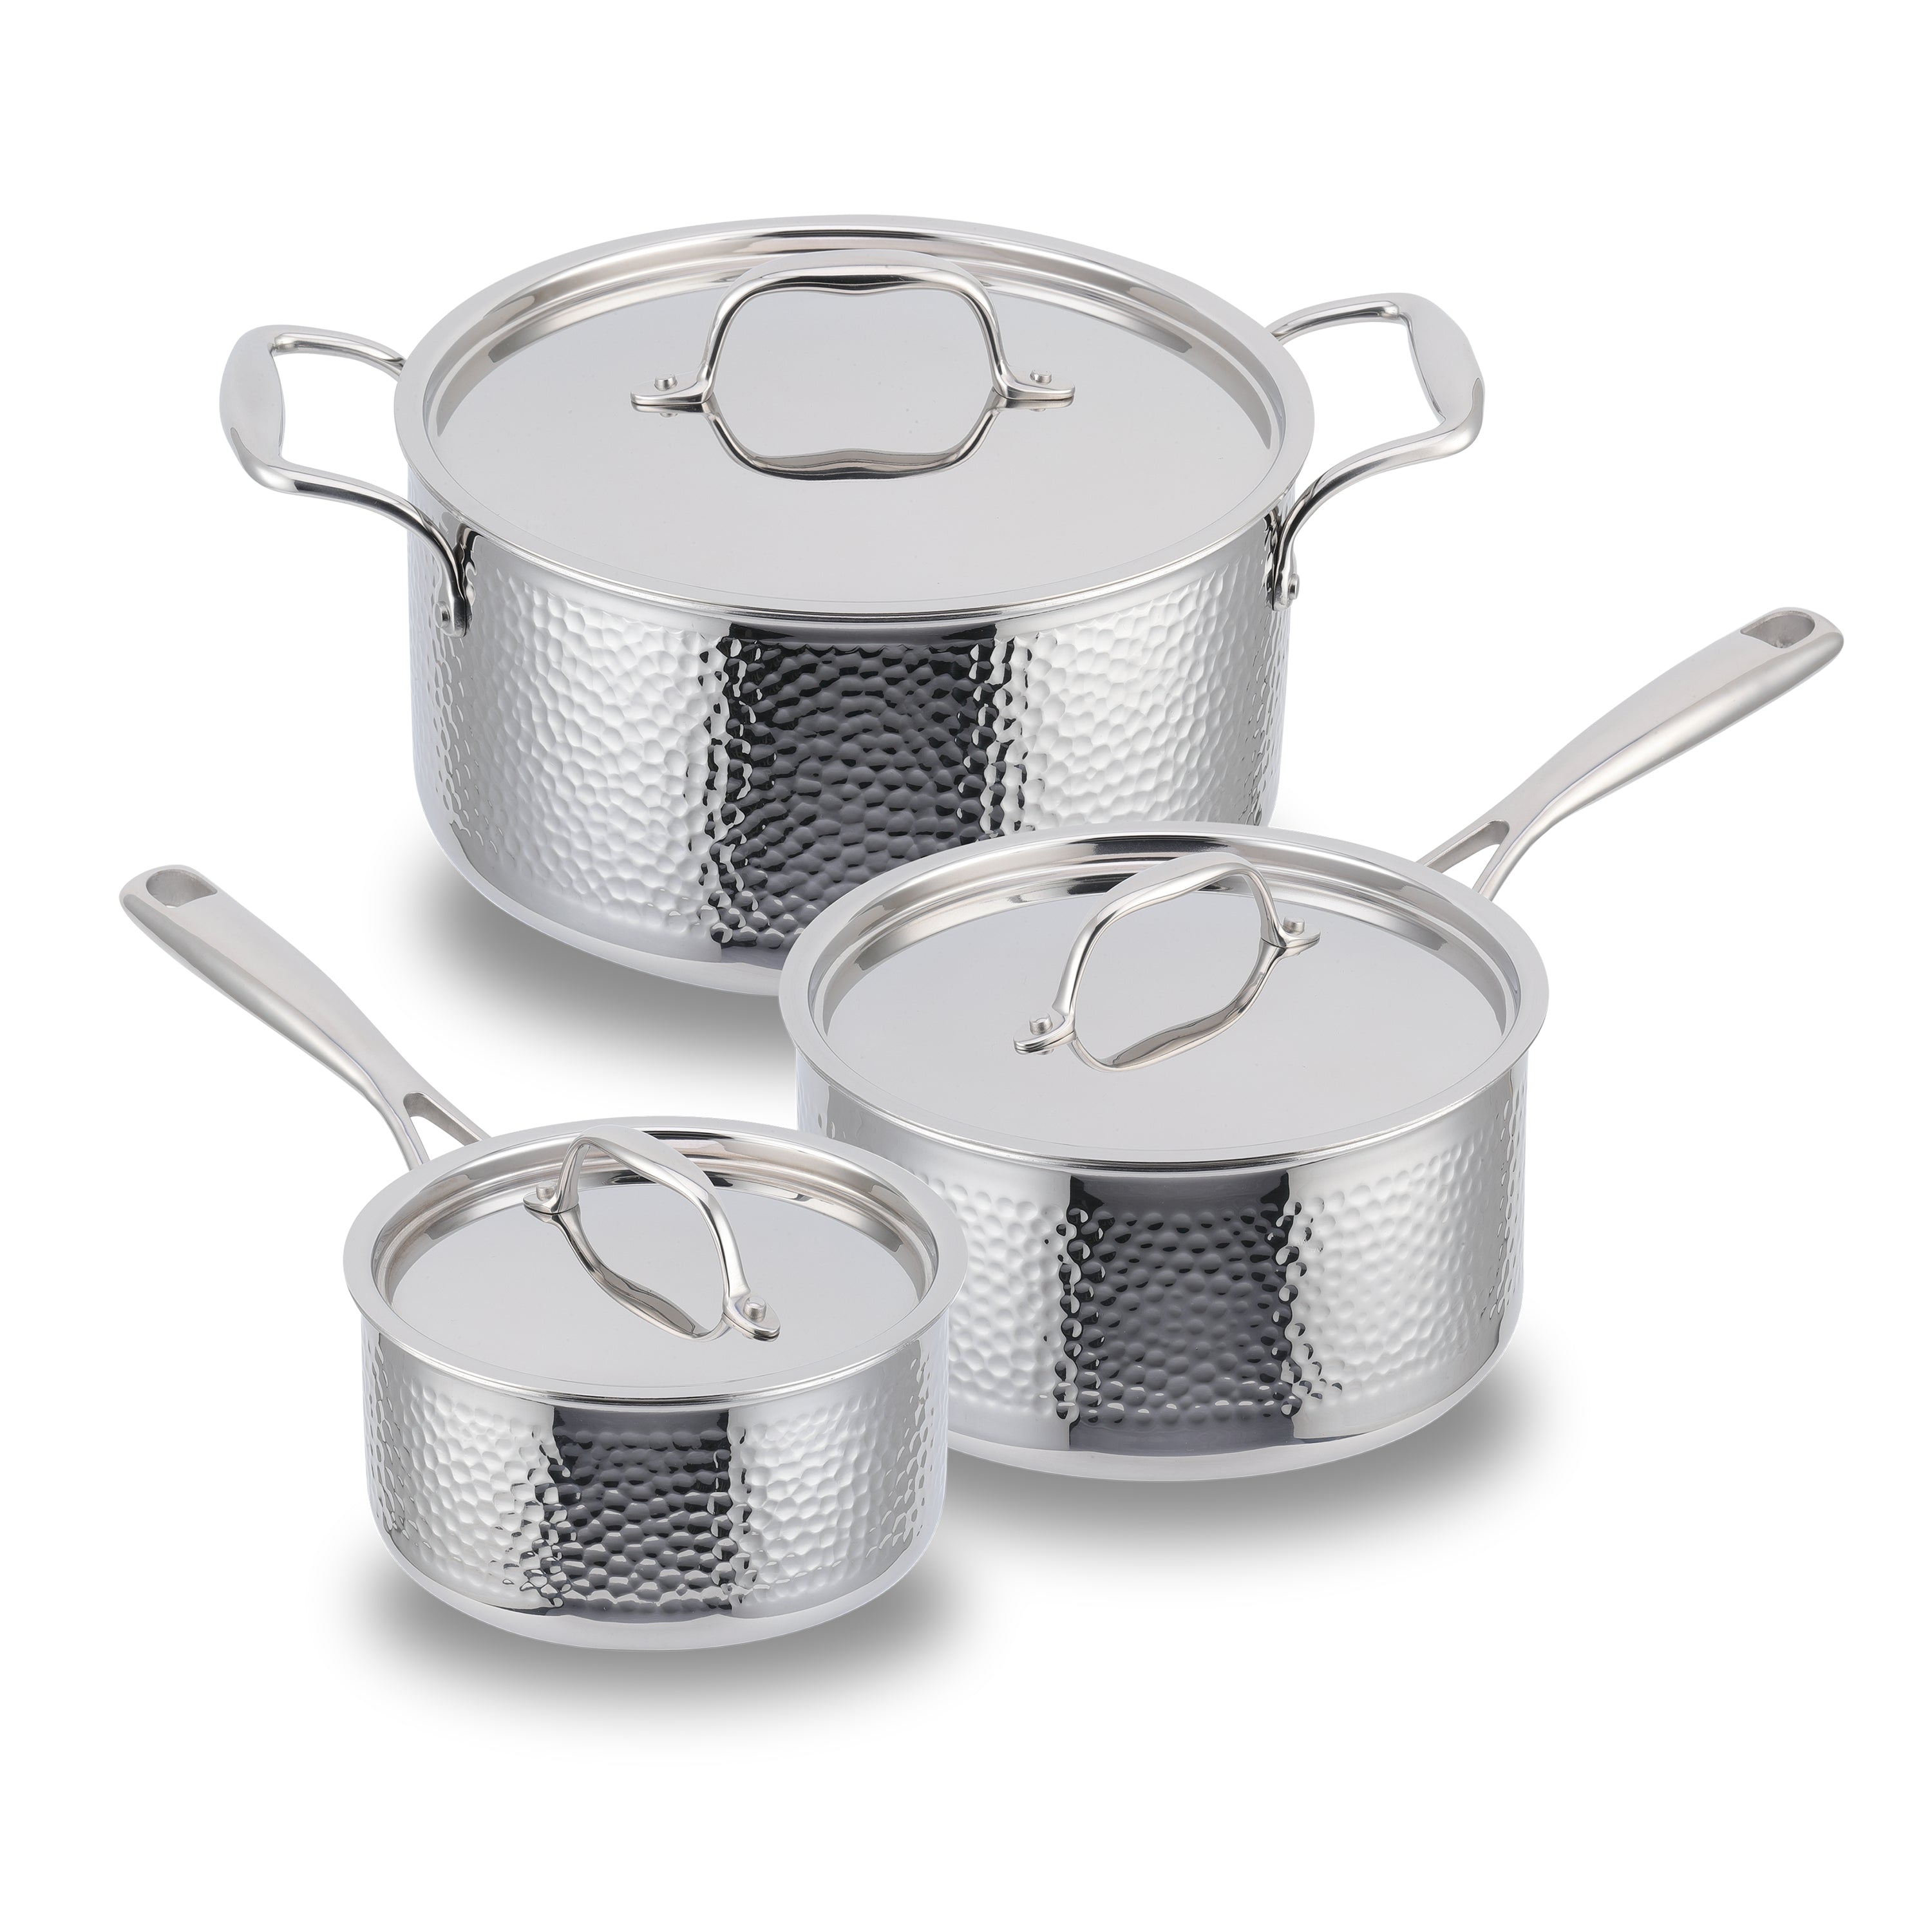 1 Qt. (.9L) Stainless Steel Sauce Pan with Cover – LCS Cooks